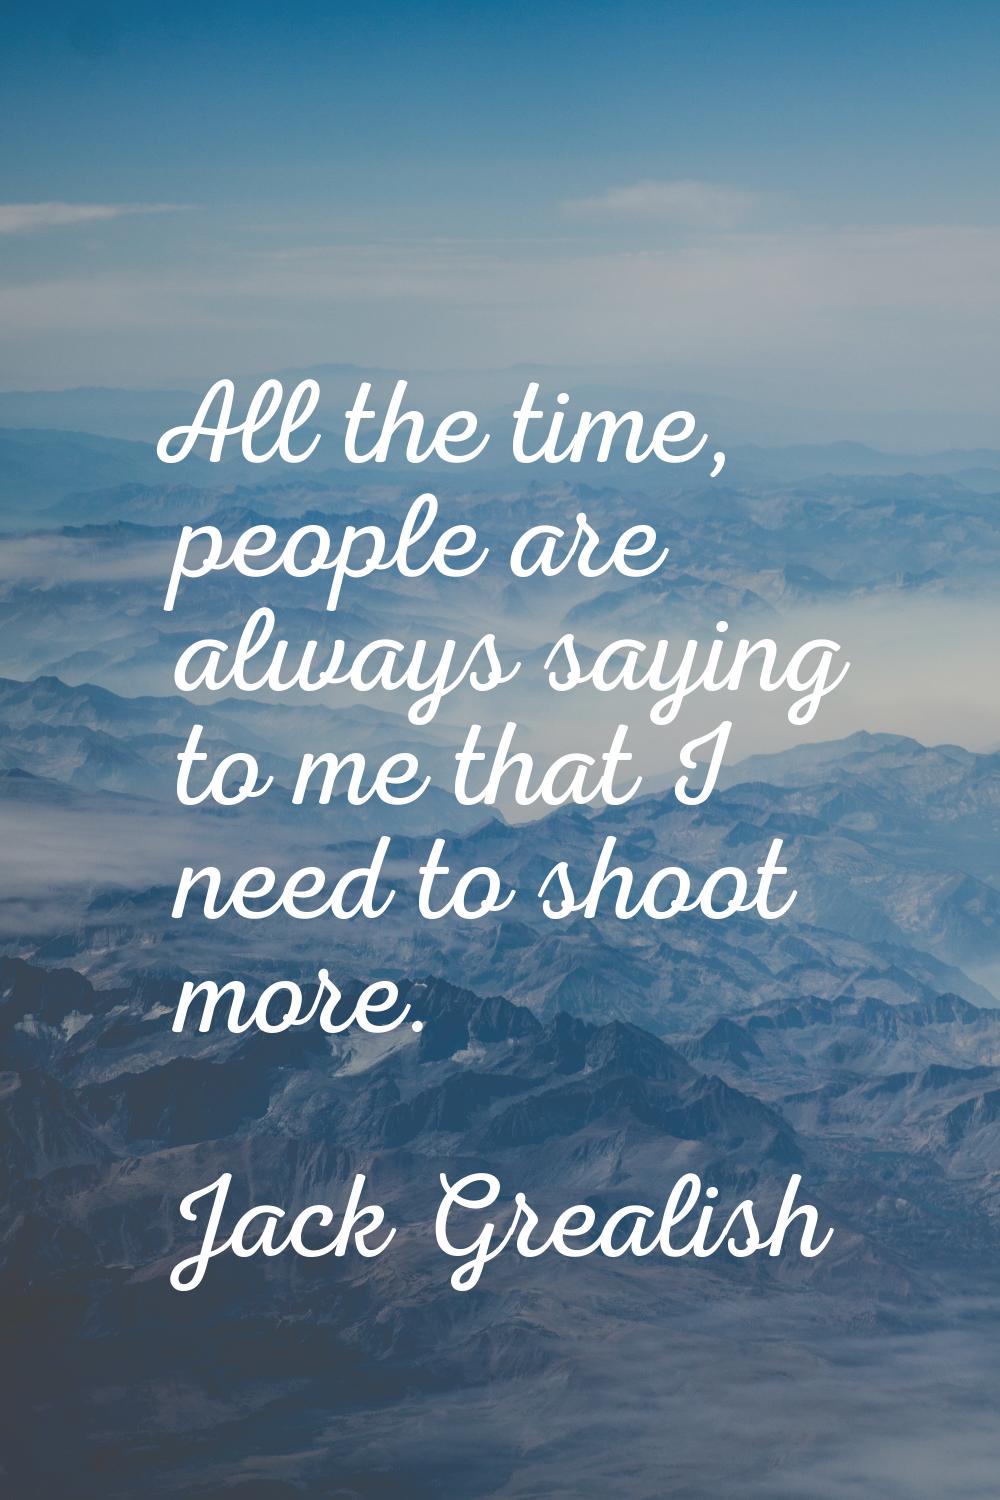 All the time, people are always saying to me that I need to shoot more.